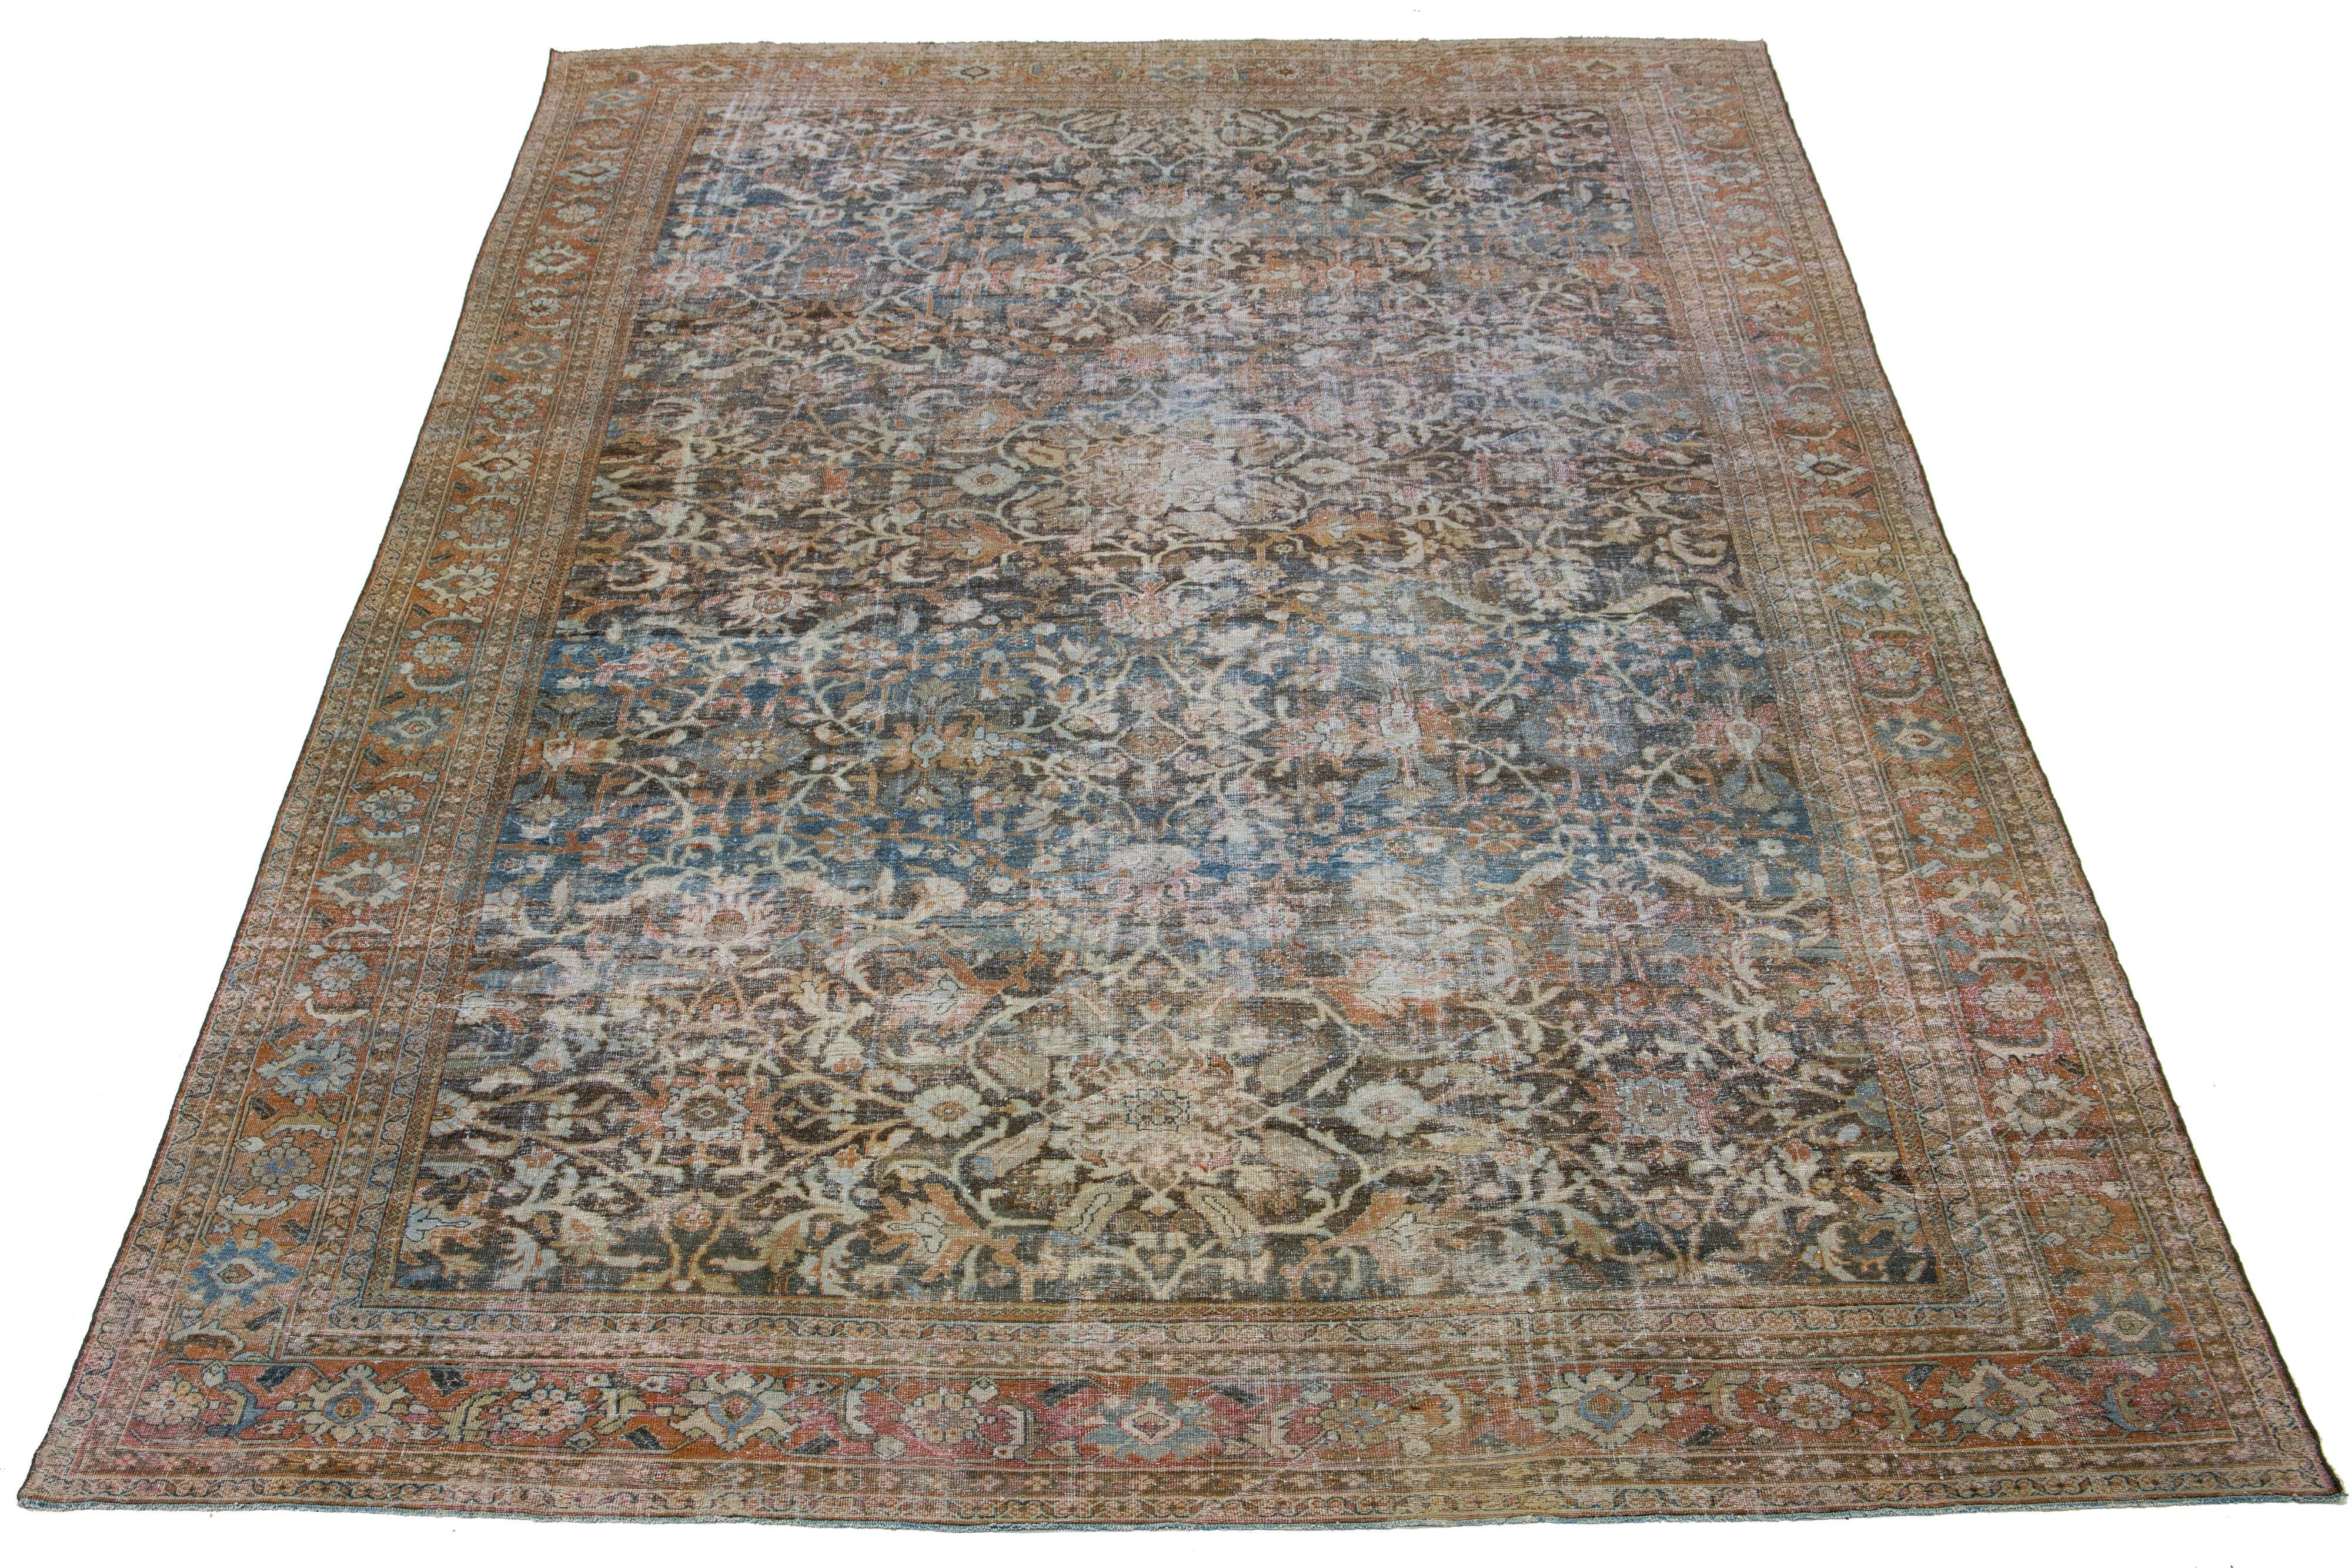 Beautiful antique Persian Mahal hand-knotted wool rug with a beige field. This piece has an orange-designed frame with gray accents in a gorgeous all-over floral design.

This rug measures 13'2